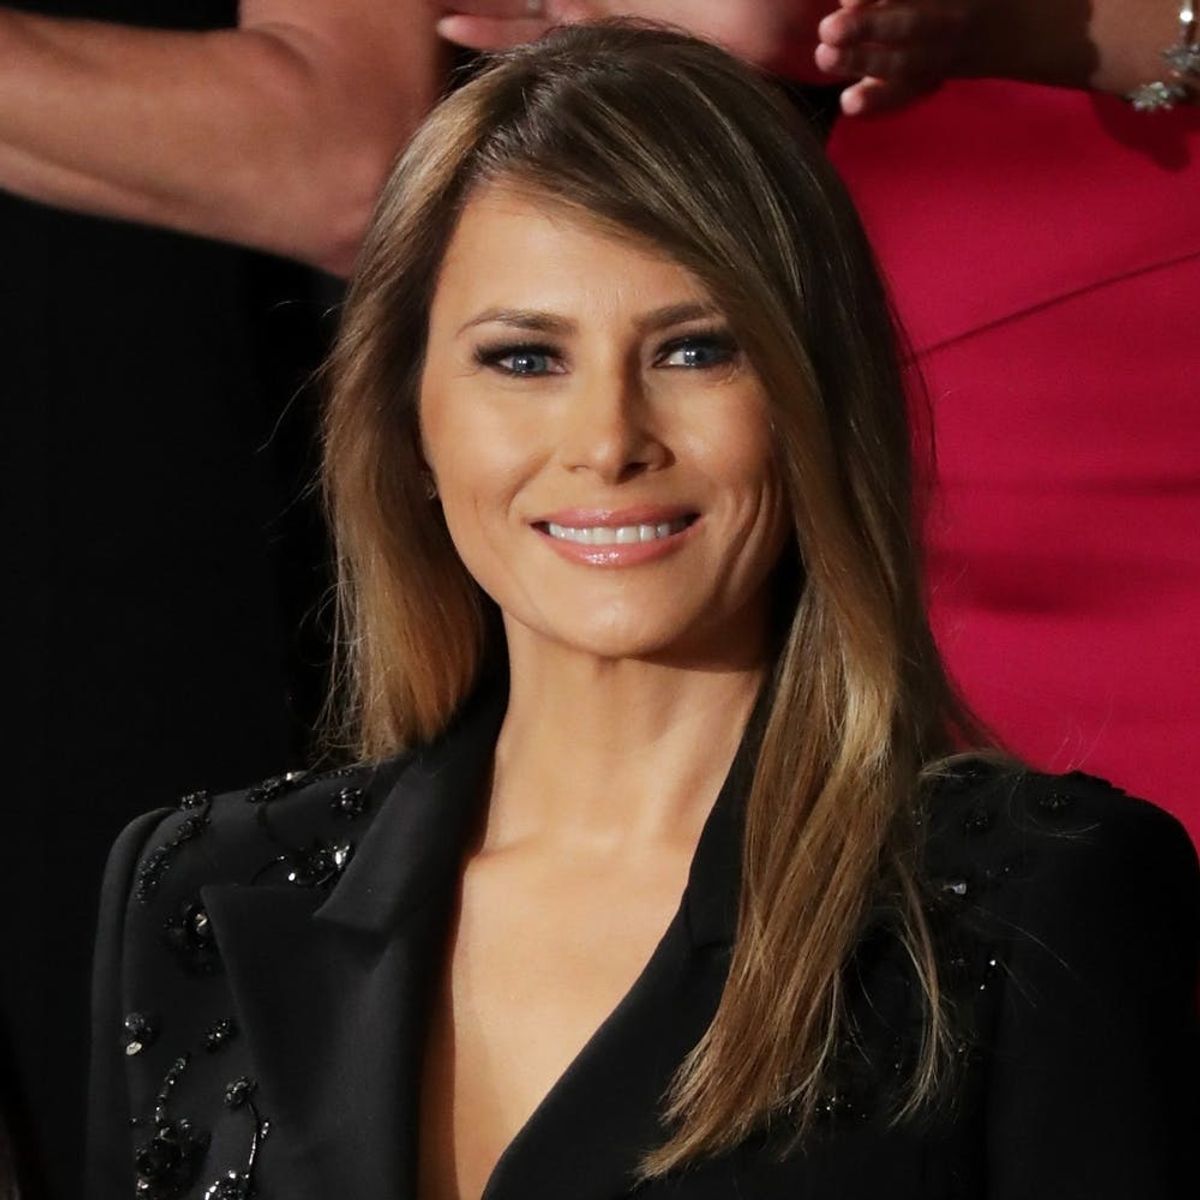 Melania Trump Wore This American Designer to the Joint Address Last Night